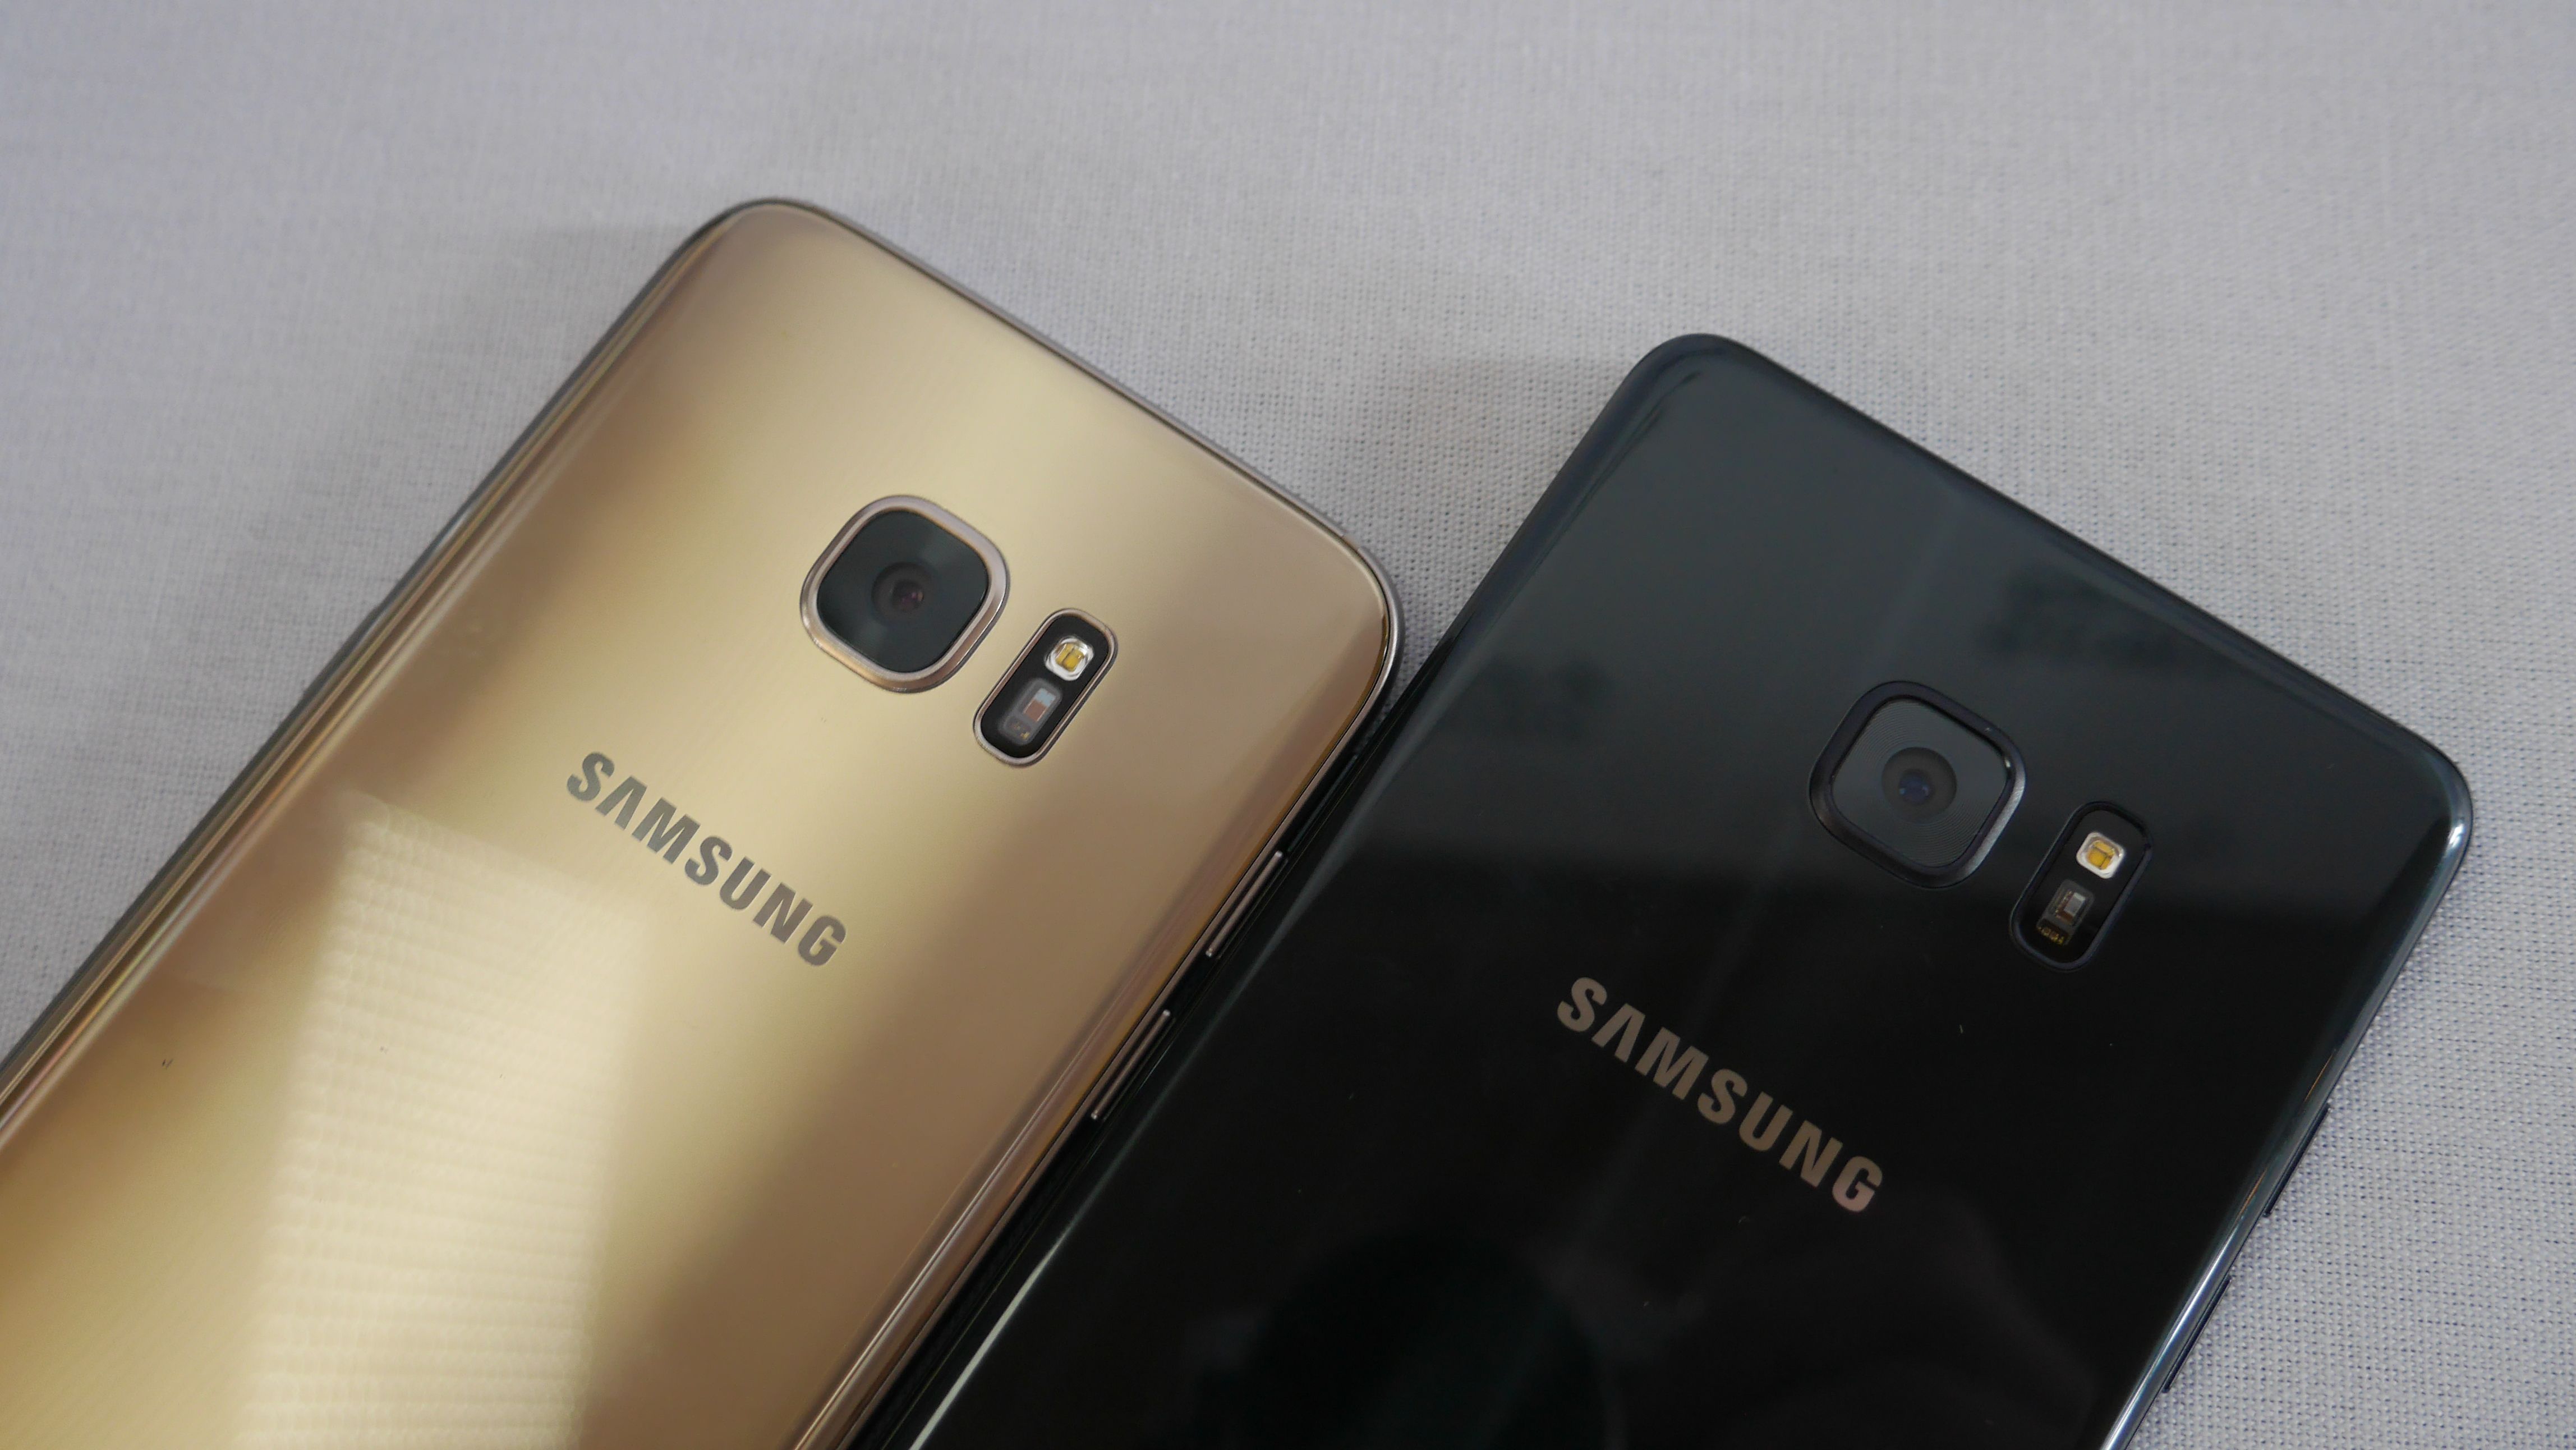 Samsung Galaxy Note 7 vs Galaxy Which better?